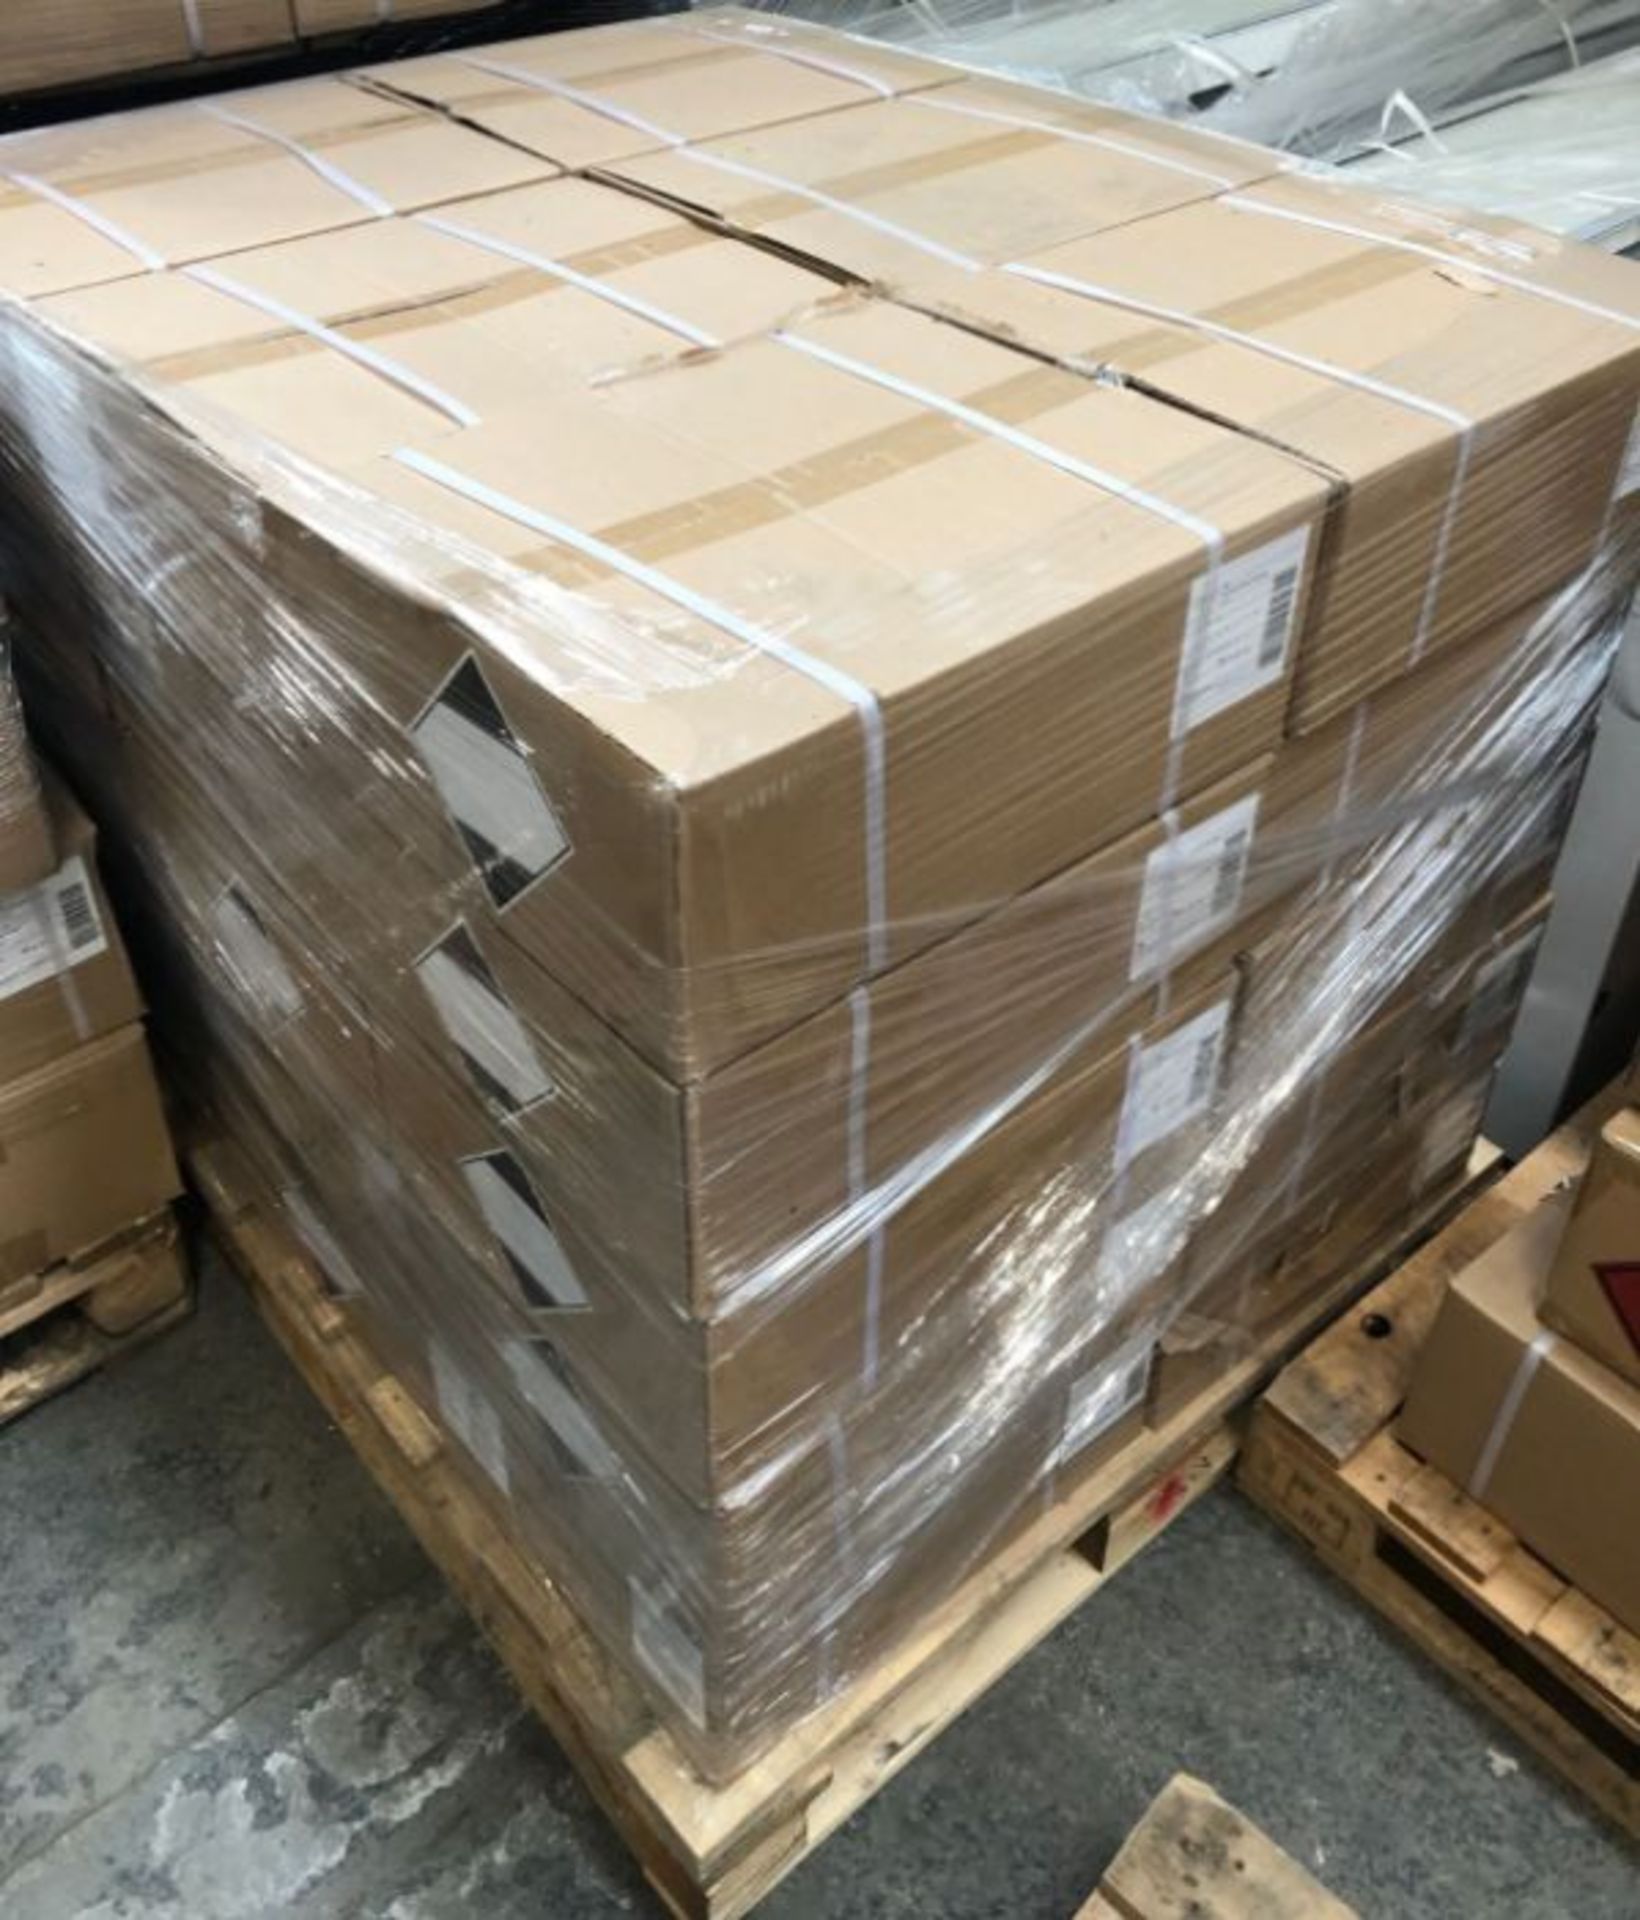 1 X BULK PALLET TO CONTAIN 30 X BOXES OF RELISAN ALCOHOL HAND GEL / 20 X 500ml BOTTLES PER BOX /